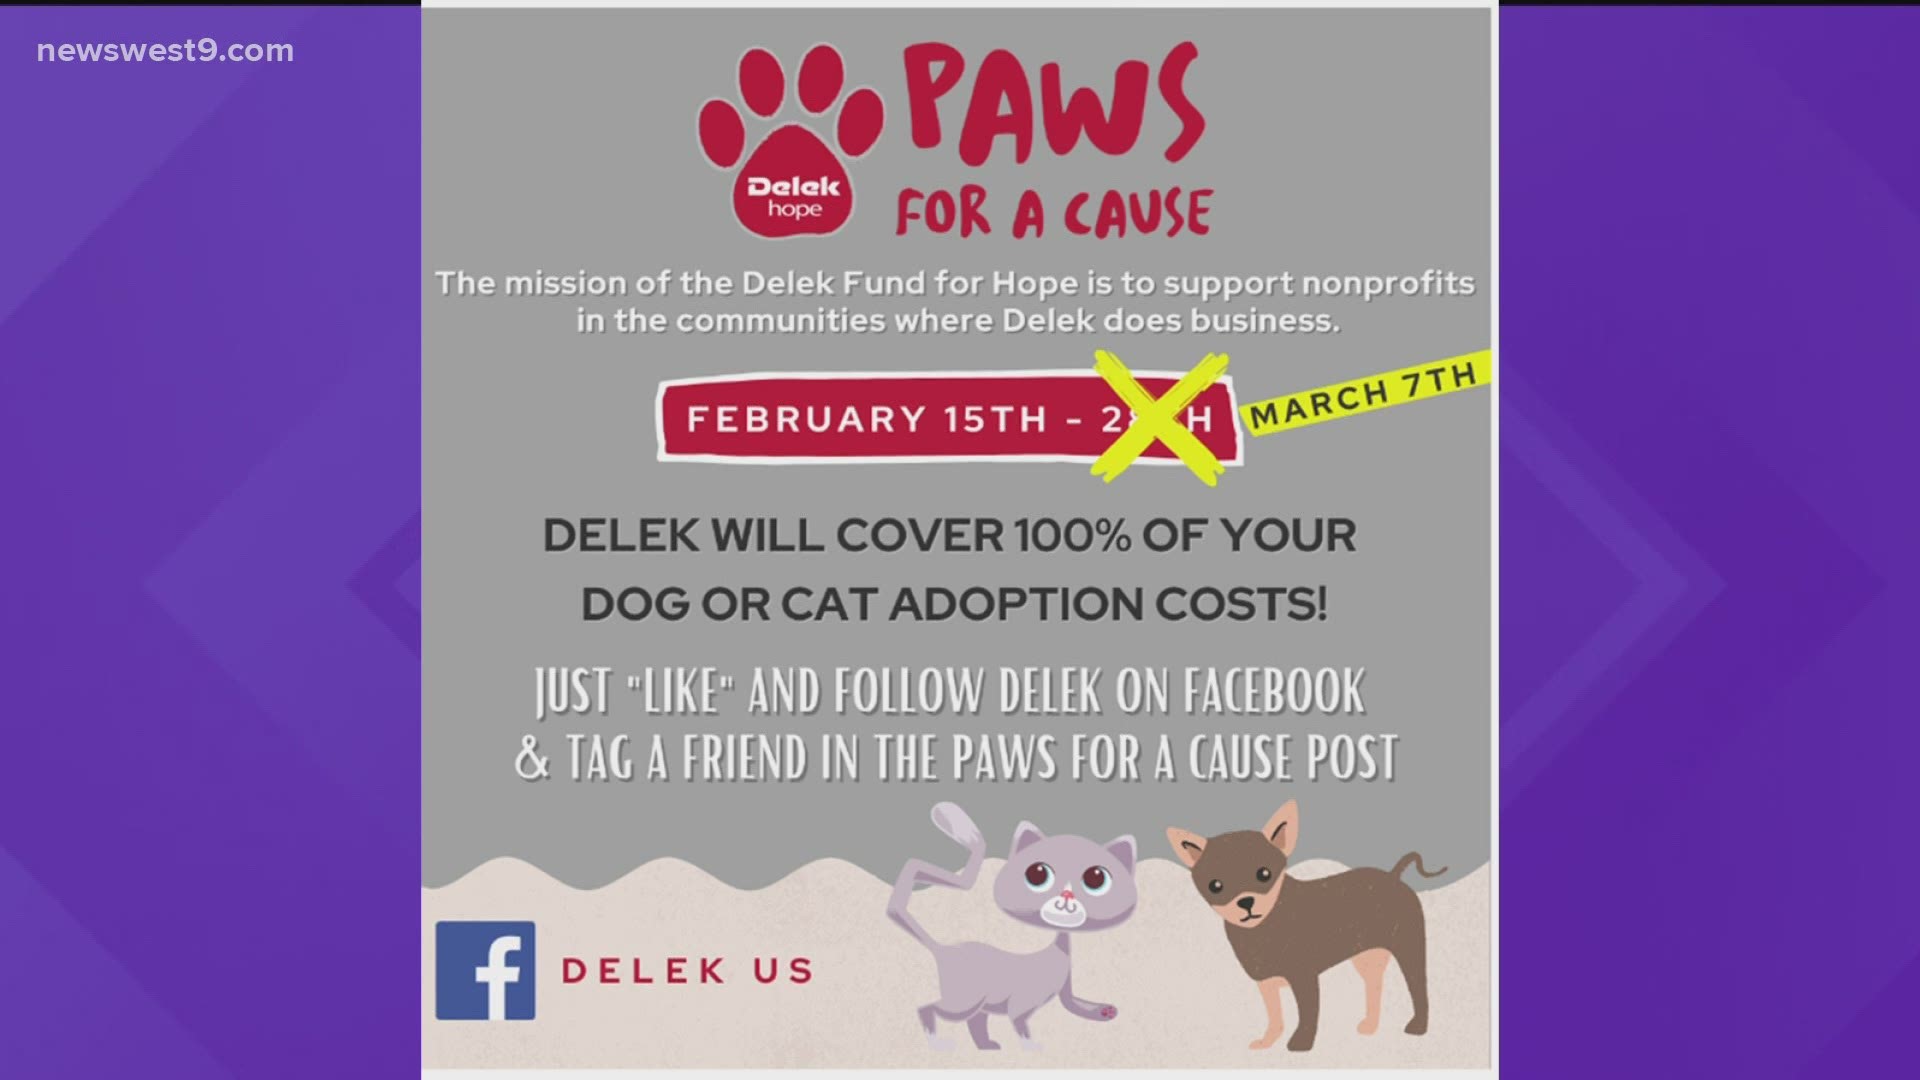 All you have to do is follow their social media, tag a friend and then reach out to the Happy Day Humane Society.